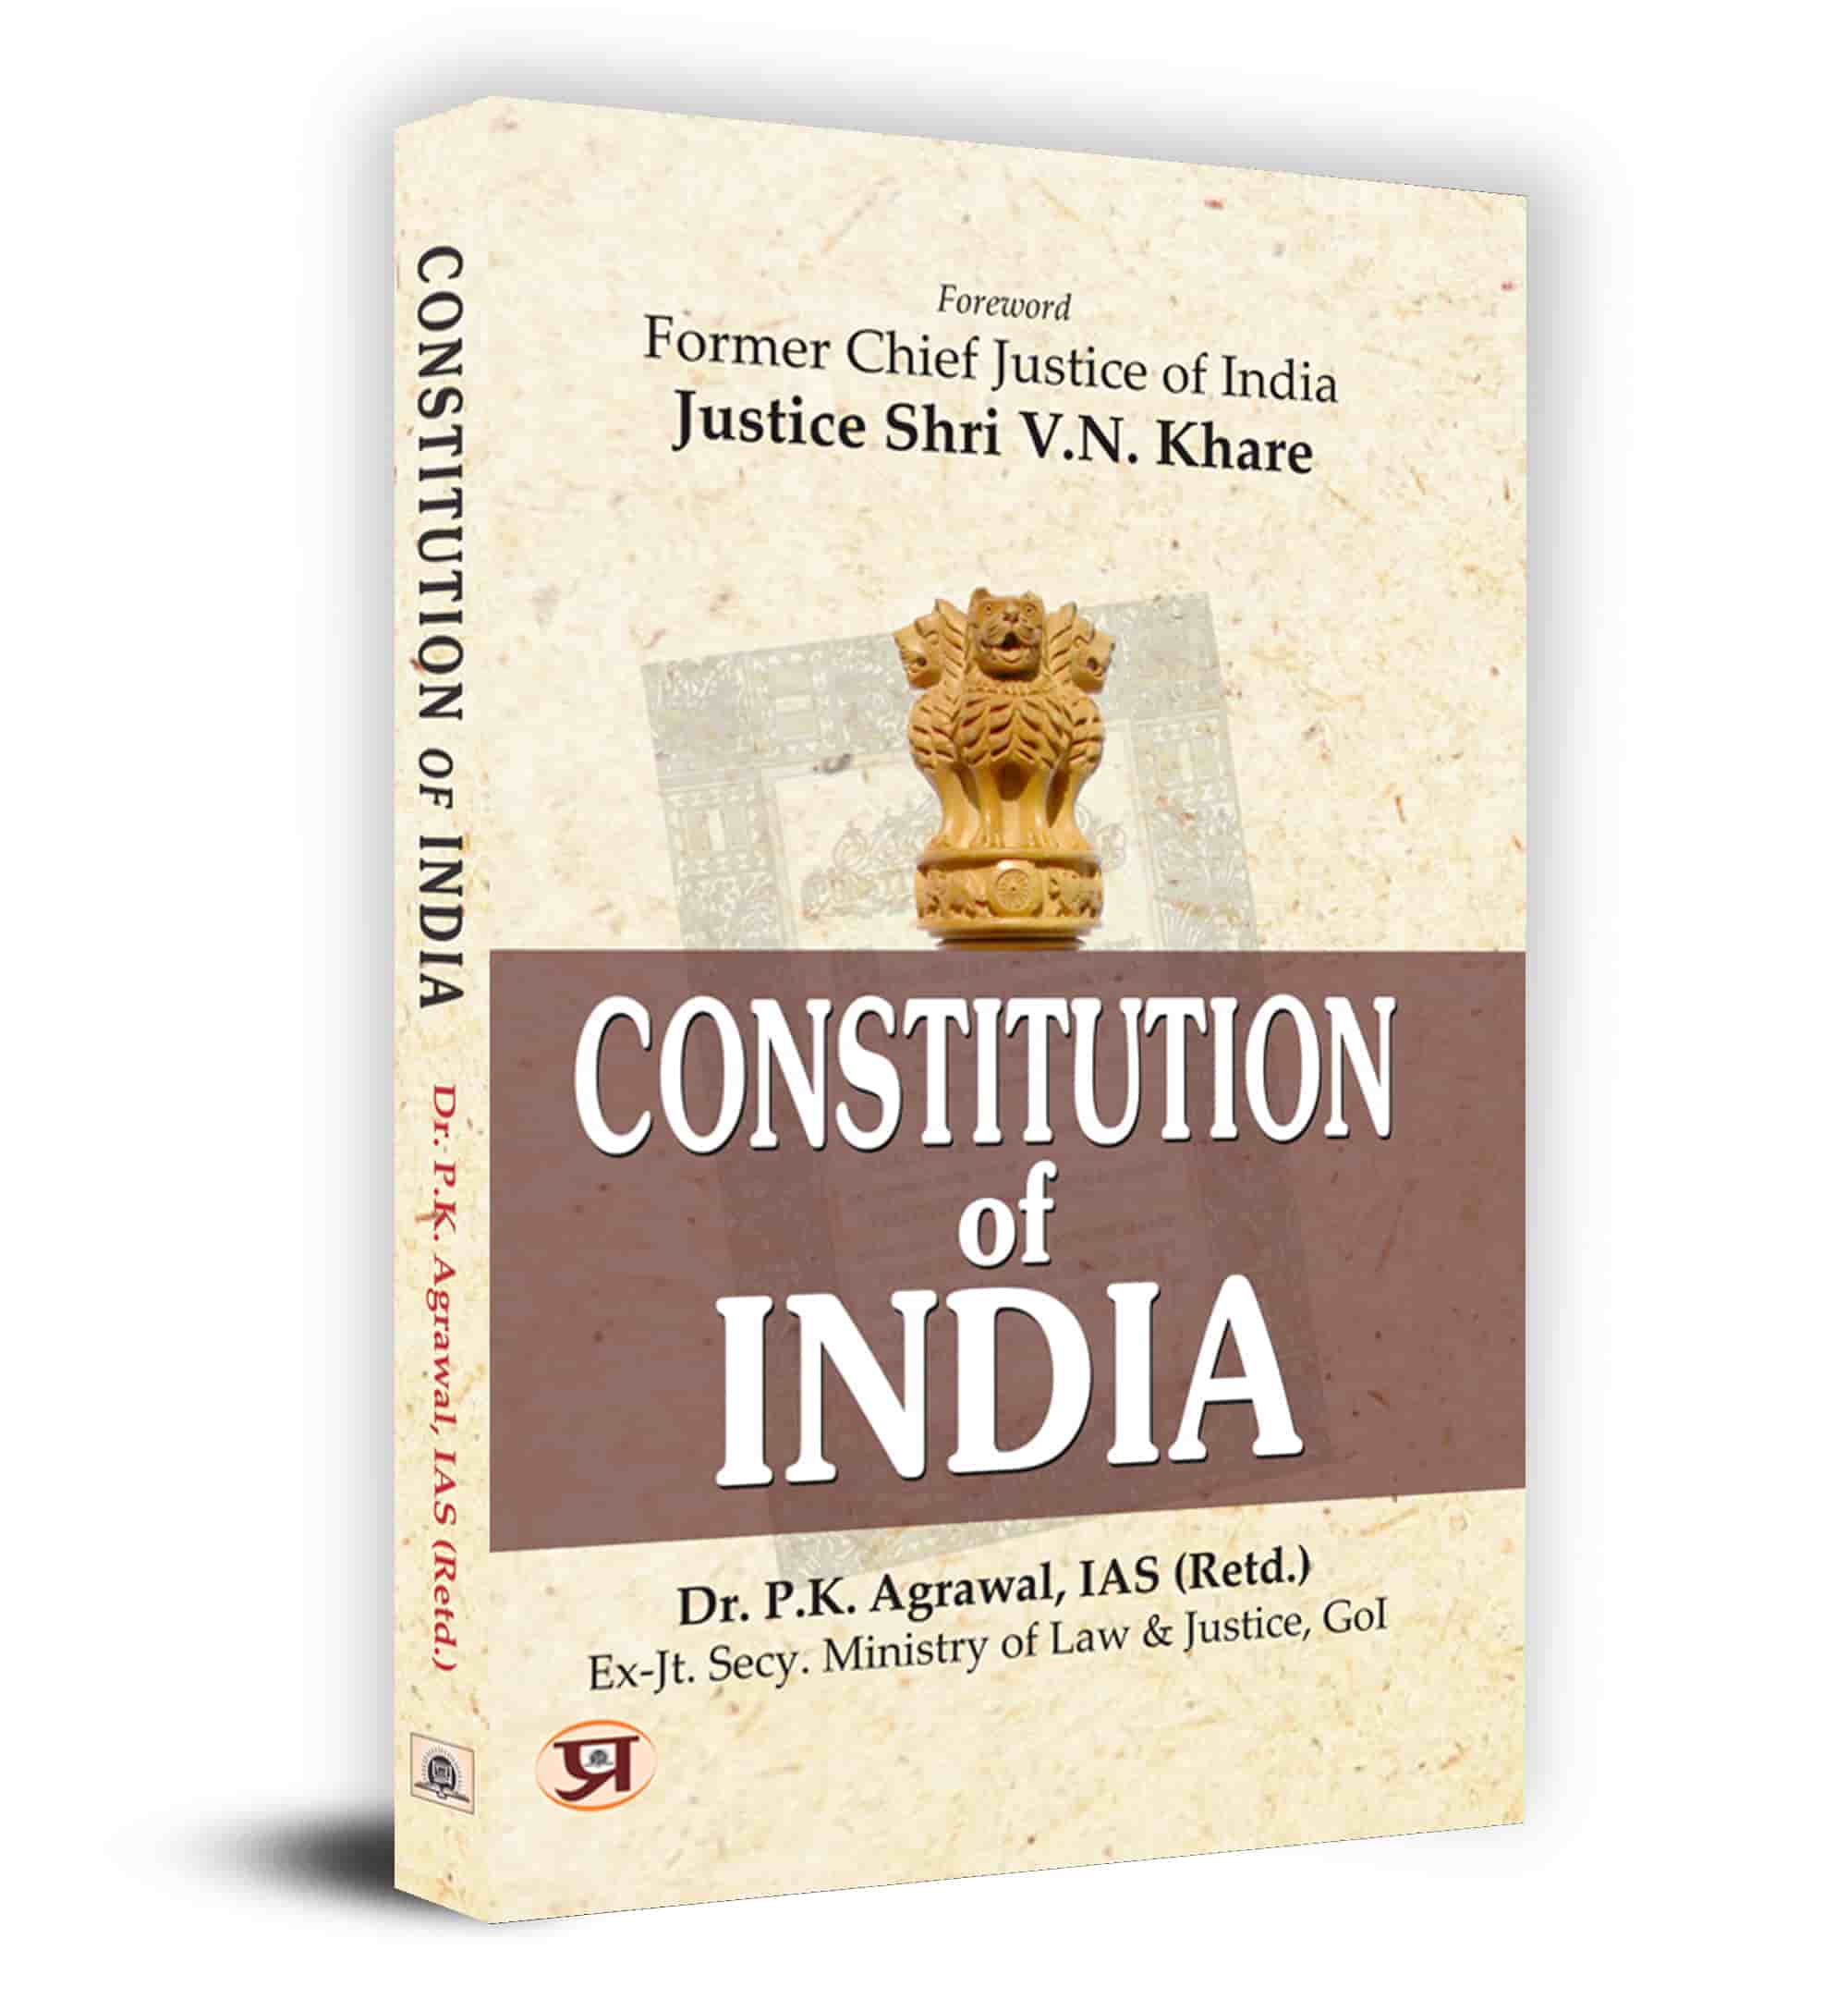 Constitution of India - Dr. P.K. Agrawal, IAS